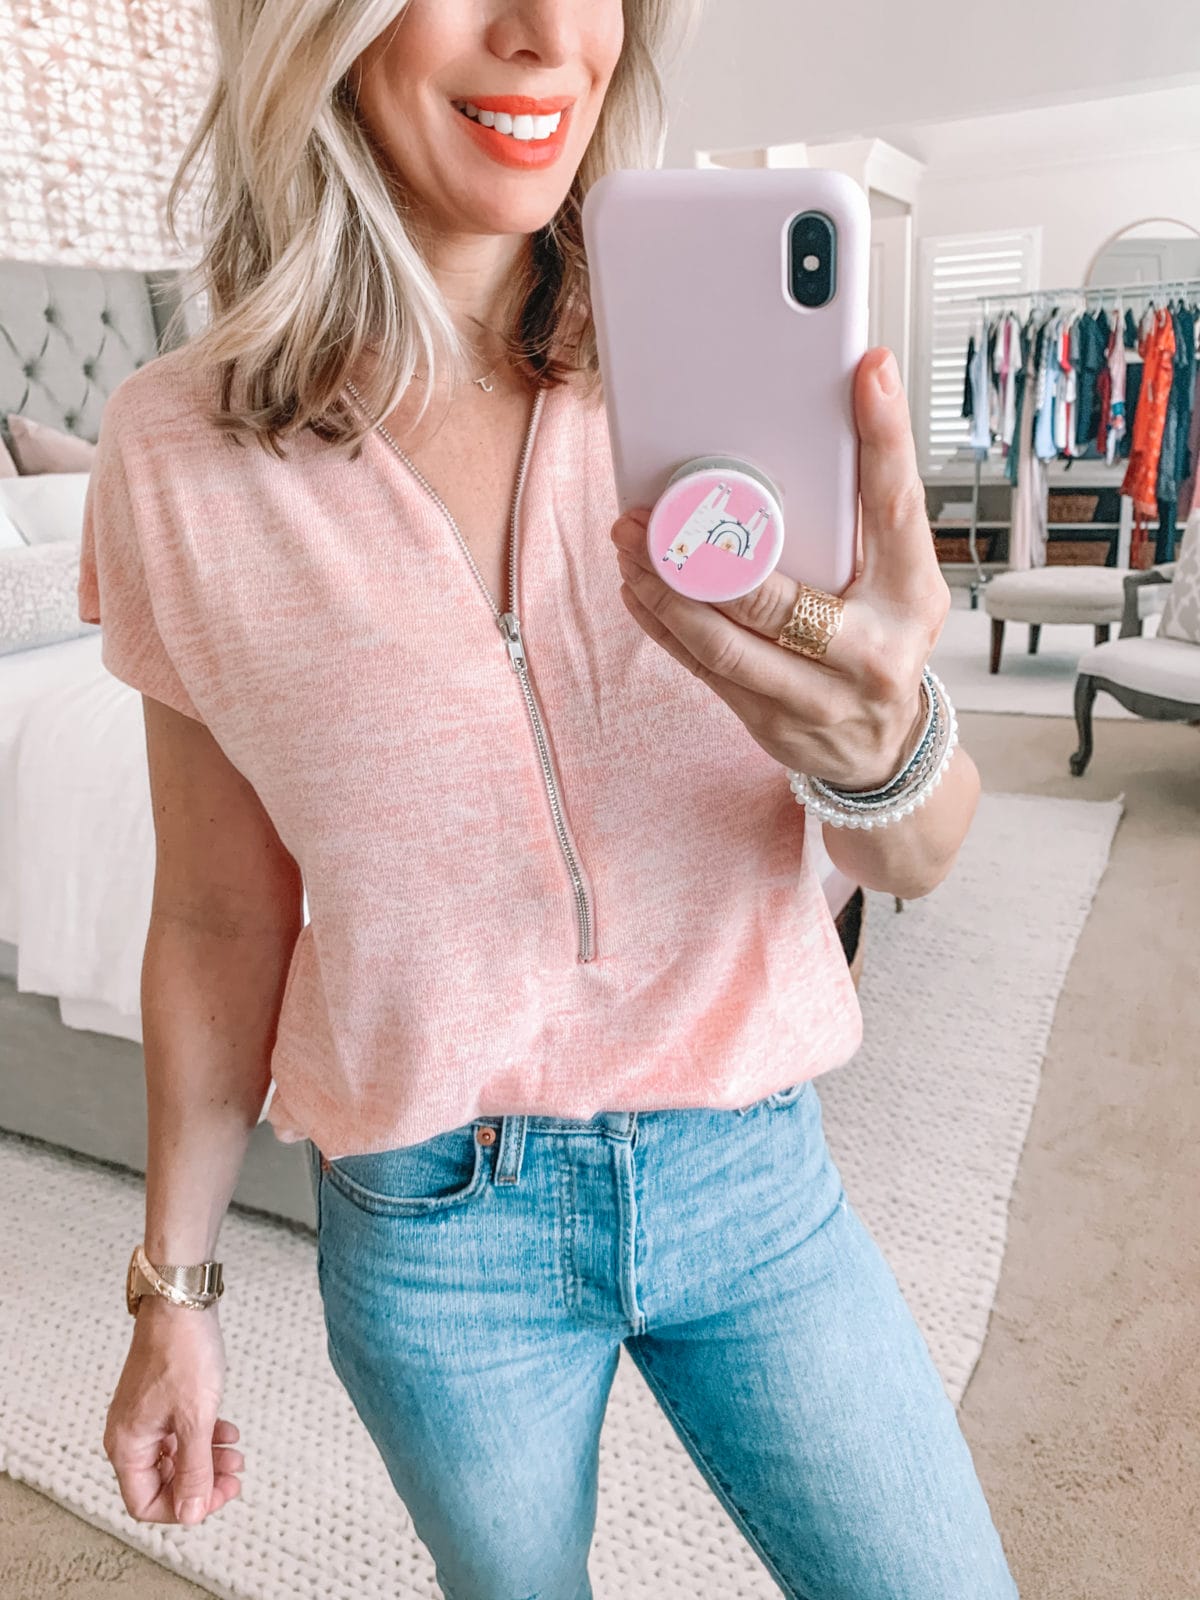 Amazon Fashion Finds, Zipper Tee, Jeans 